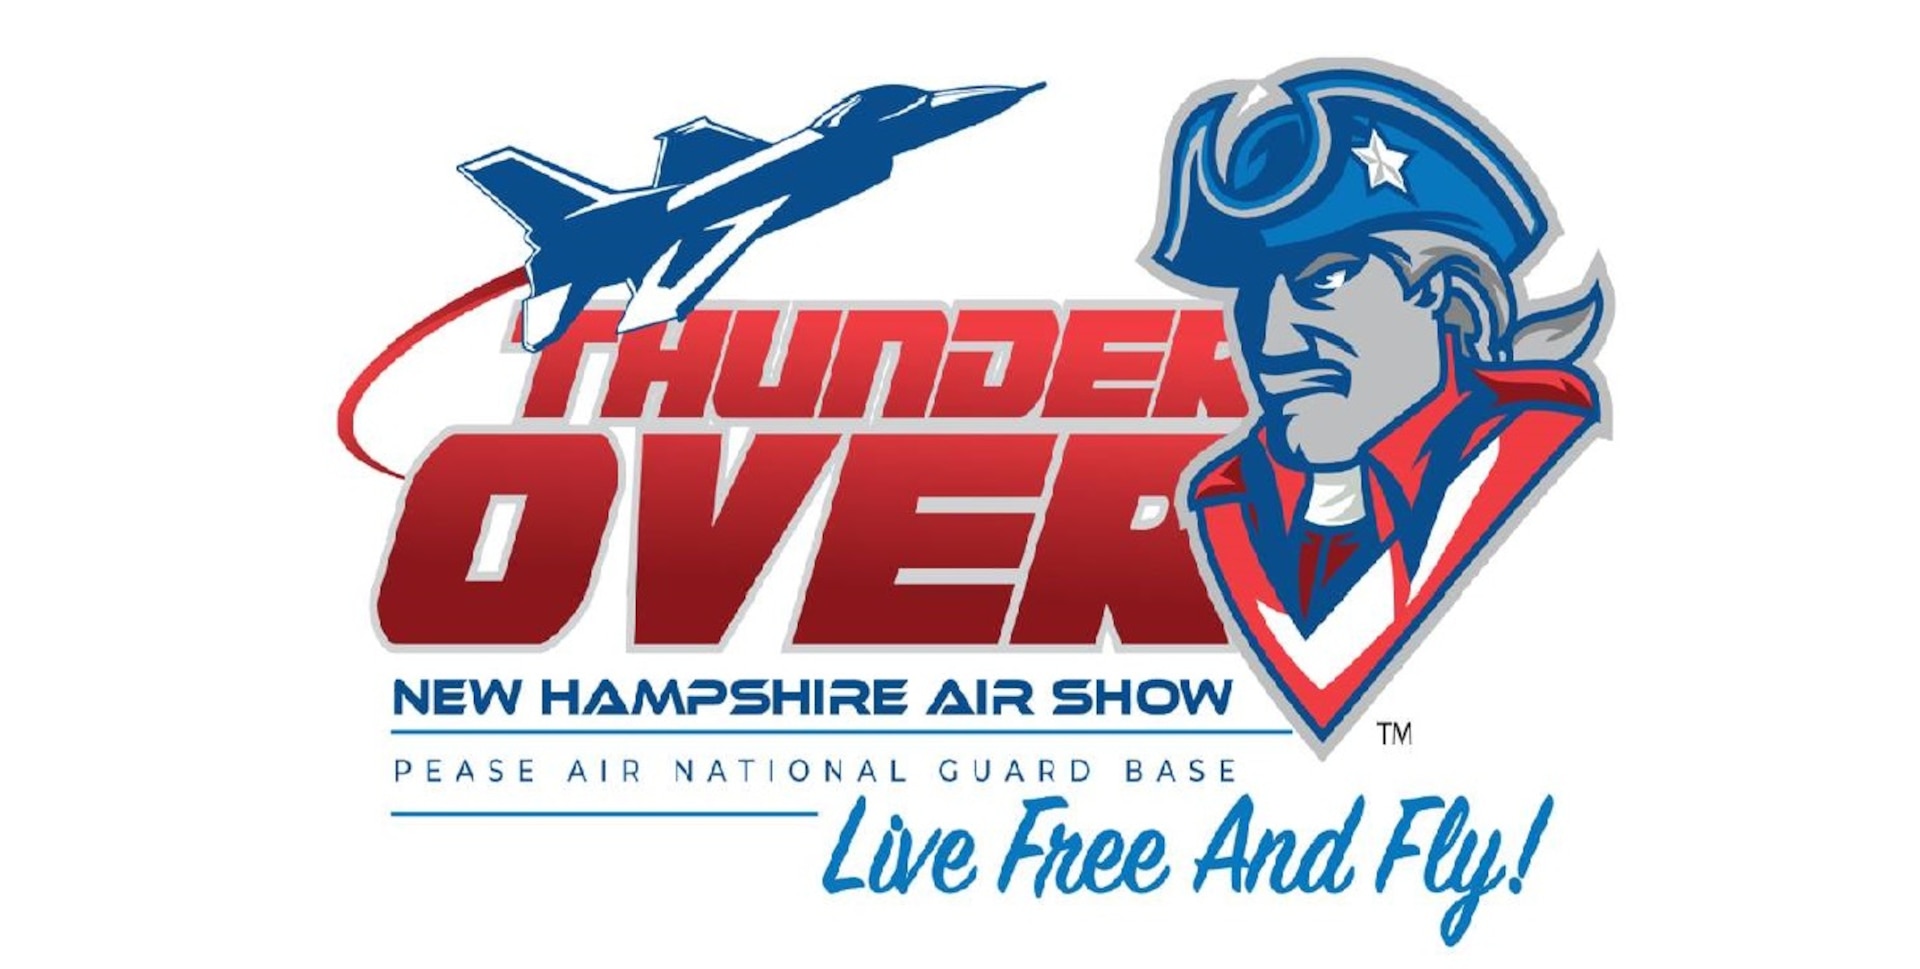 Thunder Over New Hampshire Air Show is scheduled for Sep. 9 - 10, 2023, at Pease ANG Base in Newington, N.H.